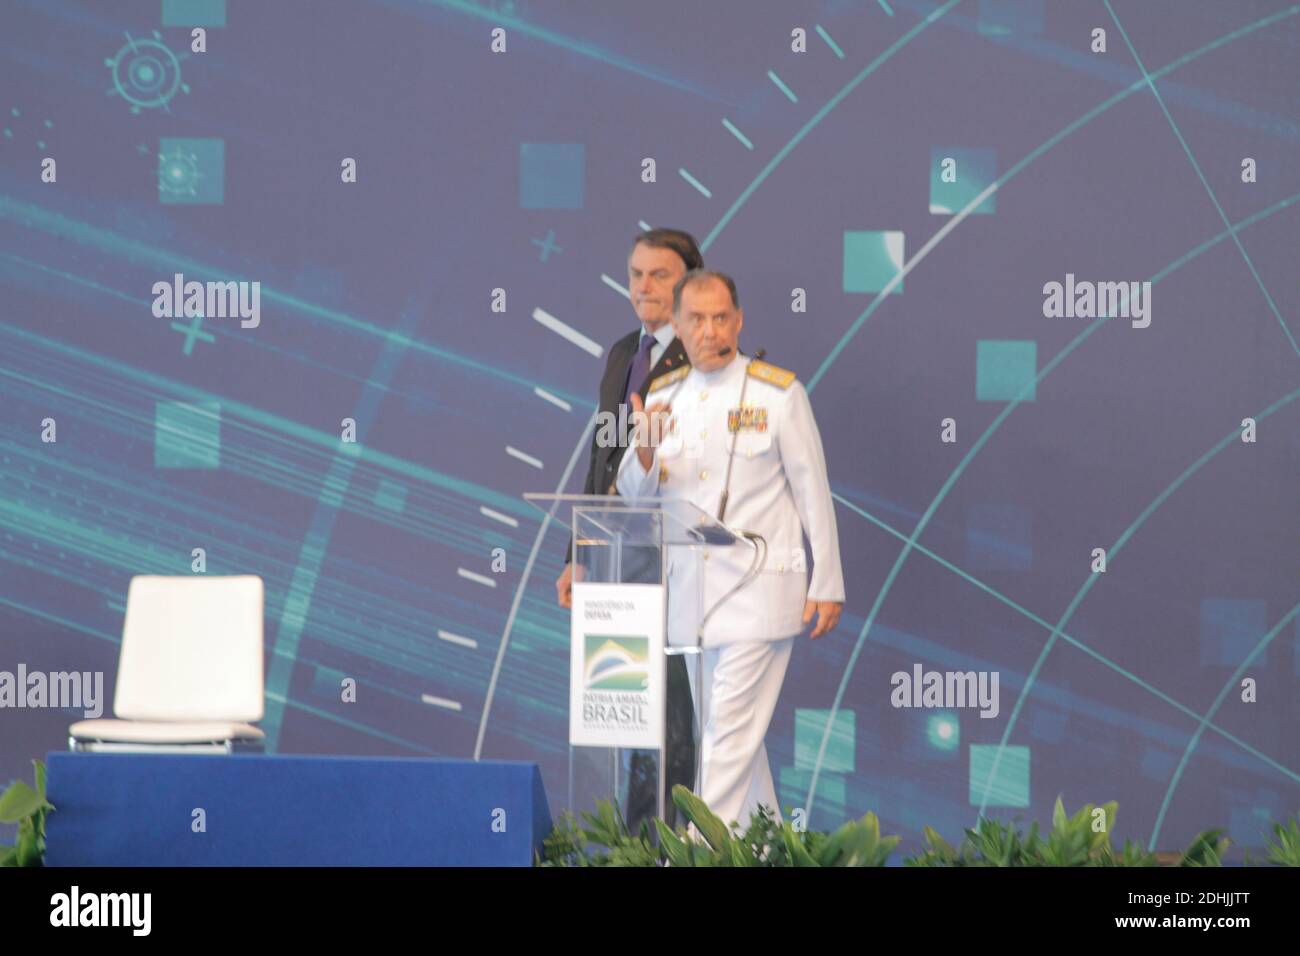 Itaguai, Brazil. 11th Dec, 2020.  LANÇAMENTO DO SUBMARINO HUMAITÁ - President Jair Bolsonaro and Admiral Ilques Barbosa, commander of the Navy during the Launching Ceremony of the Submarine Humaitá and Integration of the hull of the Toneleiro submarine, held this morning (11, at the Naval Complex of Itaguaí on the island of Madeira in the city of Itaguaí, RJ . Credit: Foto Arena LTDA/Alamy Live News Stock Photo